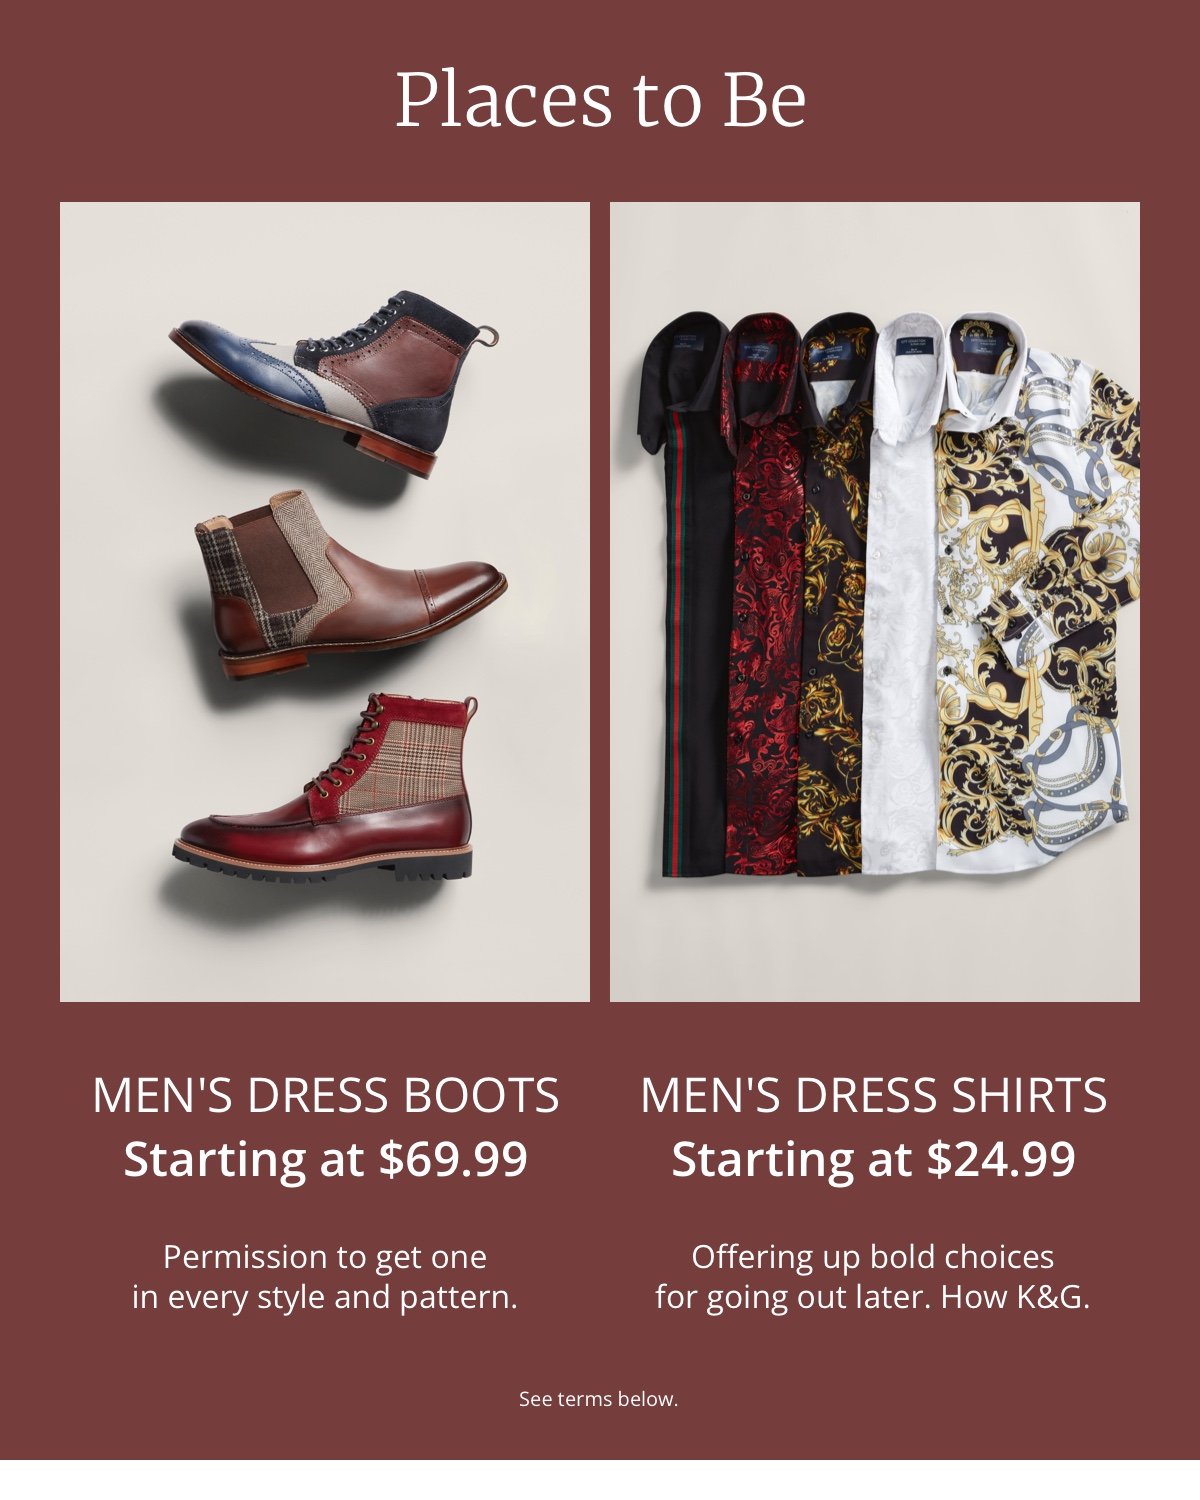 Places to Be|Men s Dress Boots|Starting at \\$69.99|Permission to get one in every style and pattern.|Men s Dress Shirts|Starting at \\$24.99|Offering up bold choices for going out later. How K and G.|See terms below.